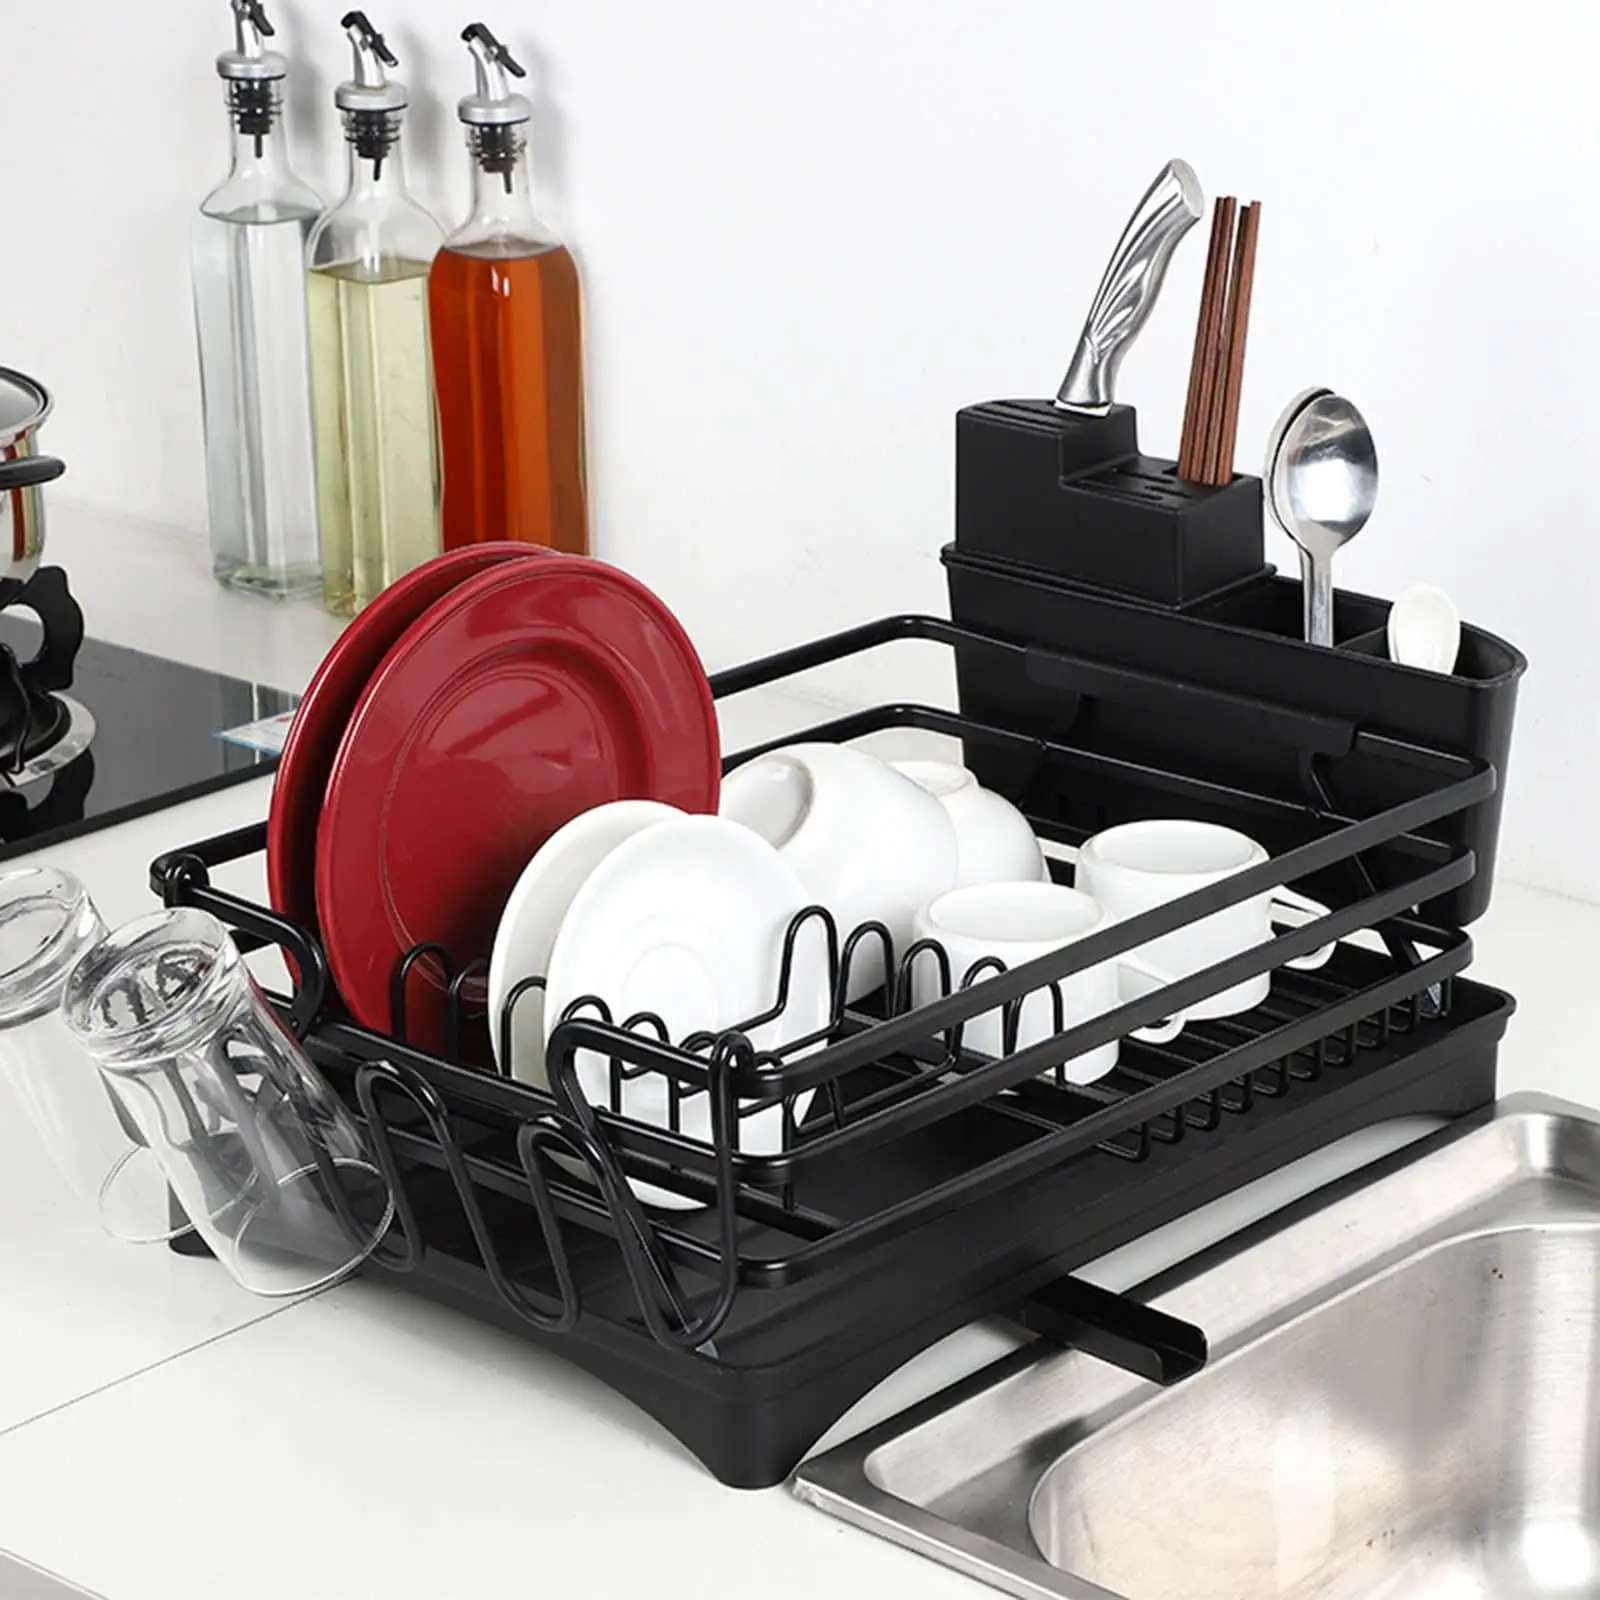 https://ae01.alicdn.com/kf/S424843d6f9664c31a799c6a25d40c110H/Storage-Shelf-Kitchen-Dish-Rack-Drainer-Tray-Rustproof-Sink-Removable-Cutlery-Plate-Holder-for-Kitchen-Counter.jpg